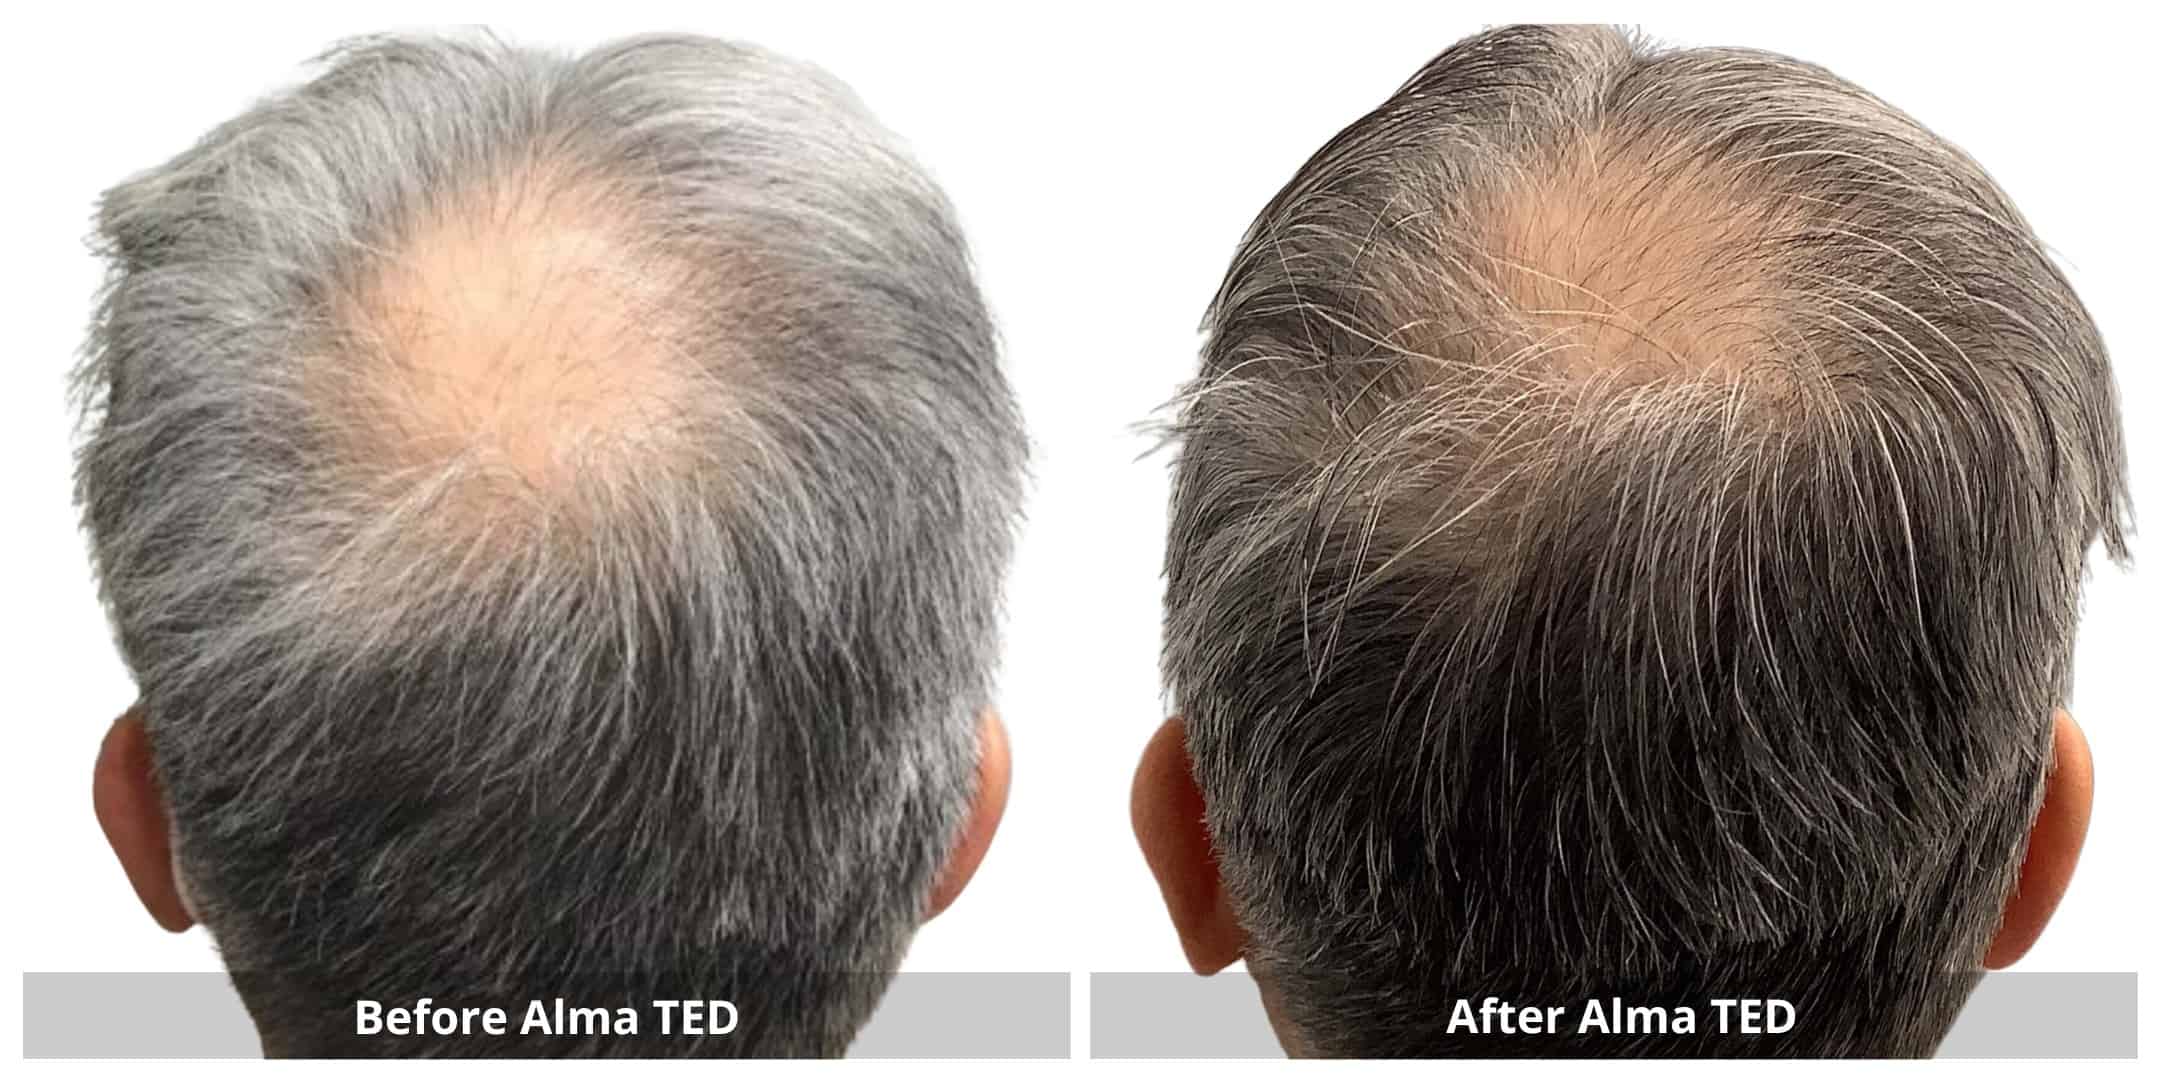 Alma ted hair restoration before and after photo 3